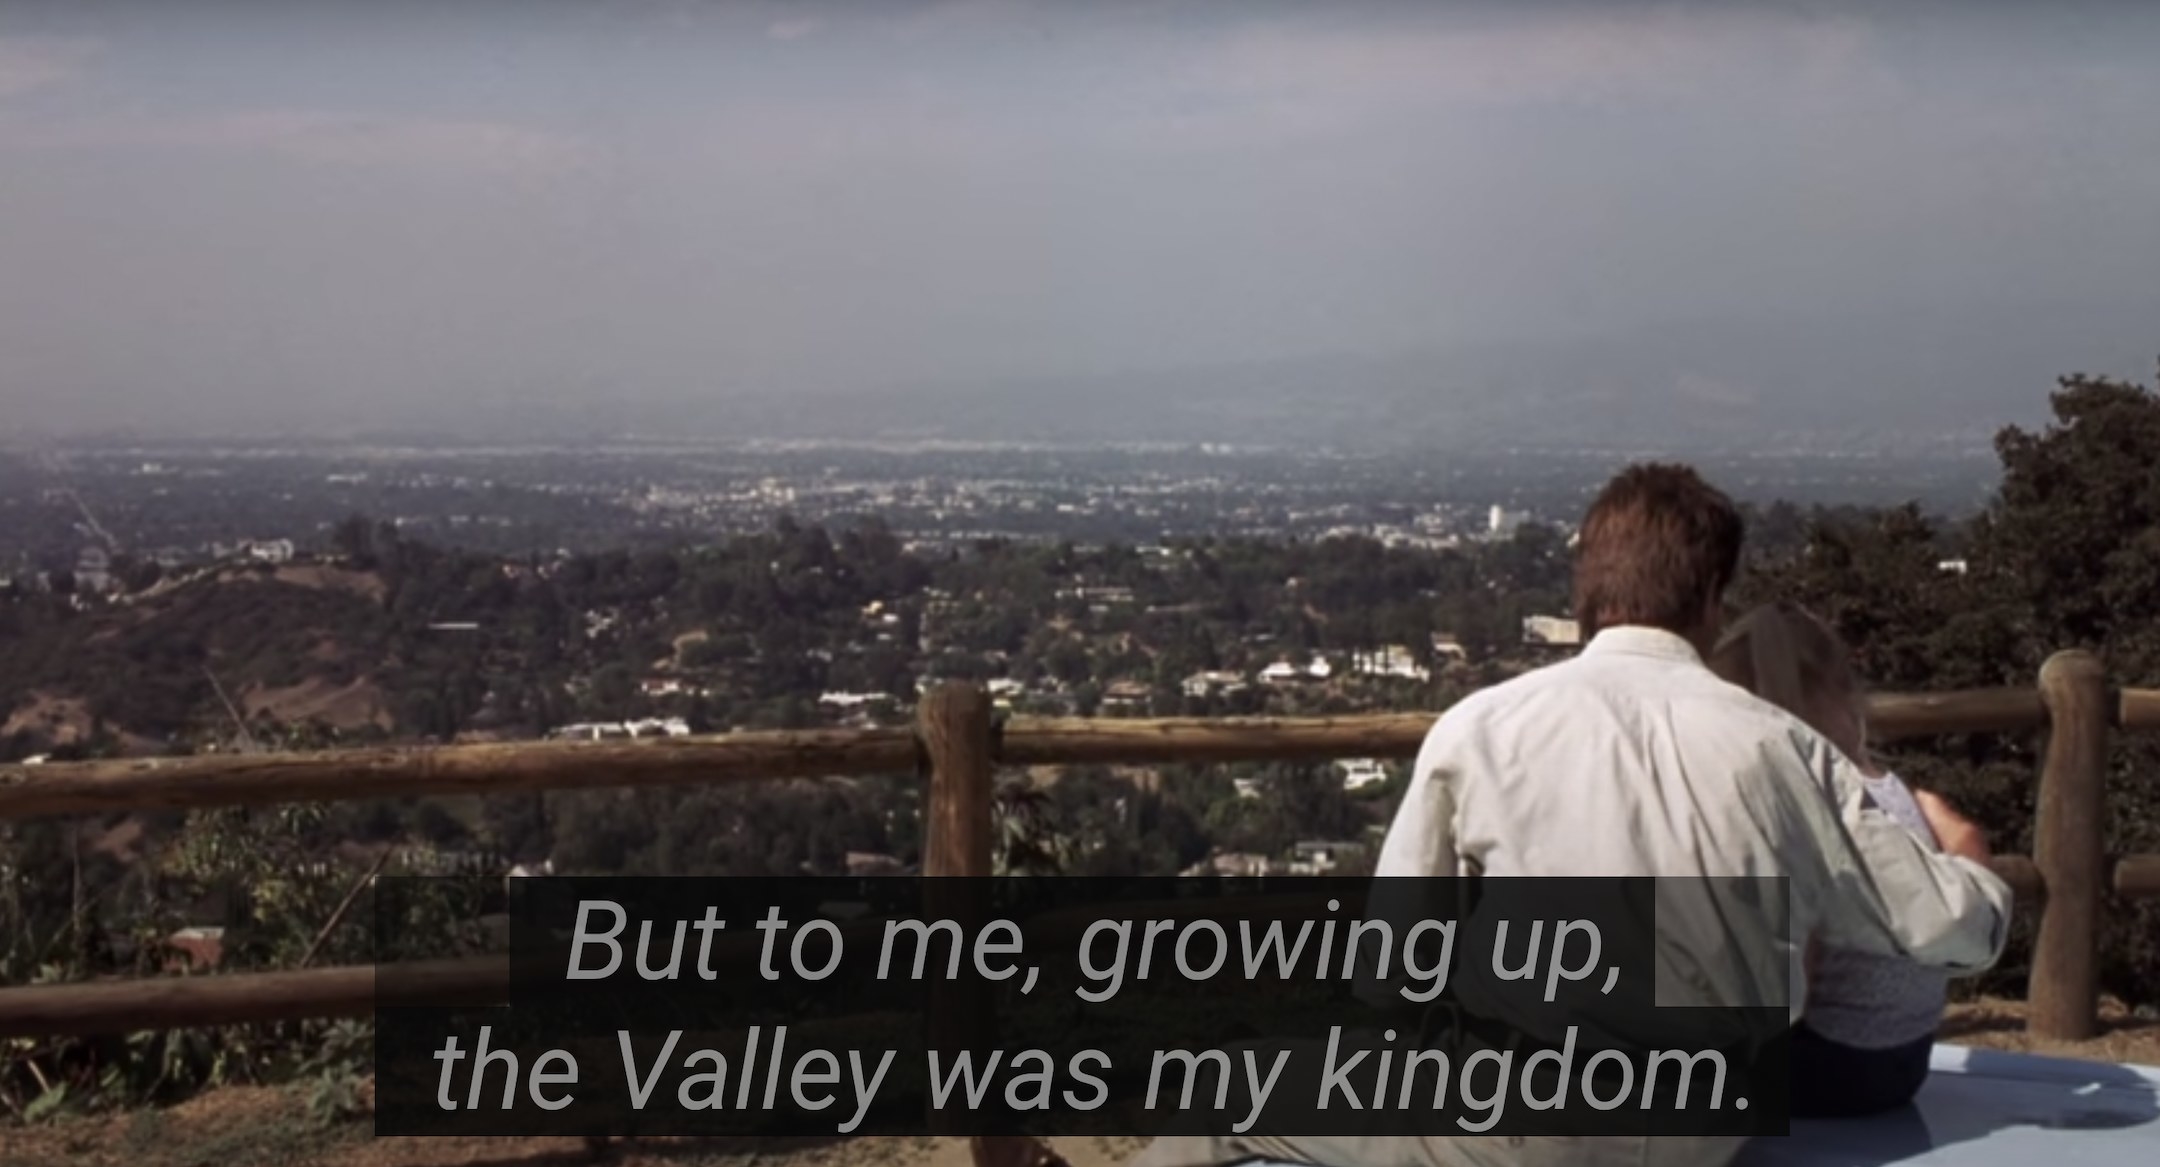 In voiceover, Sam says, But to me, growing up, he Valley was my kingdom